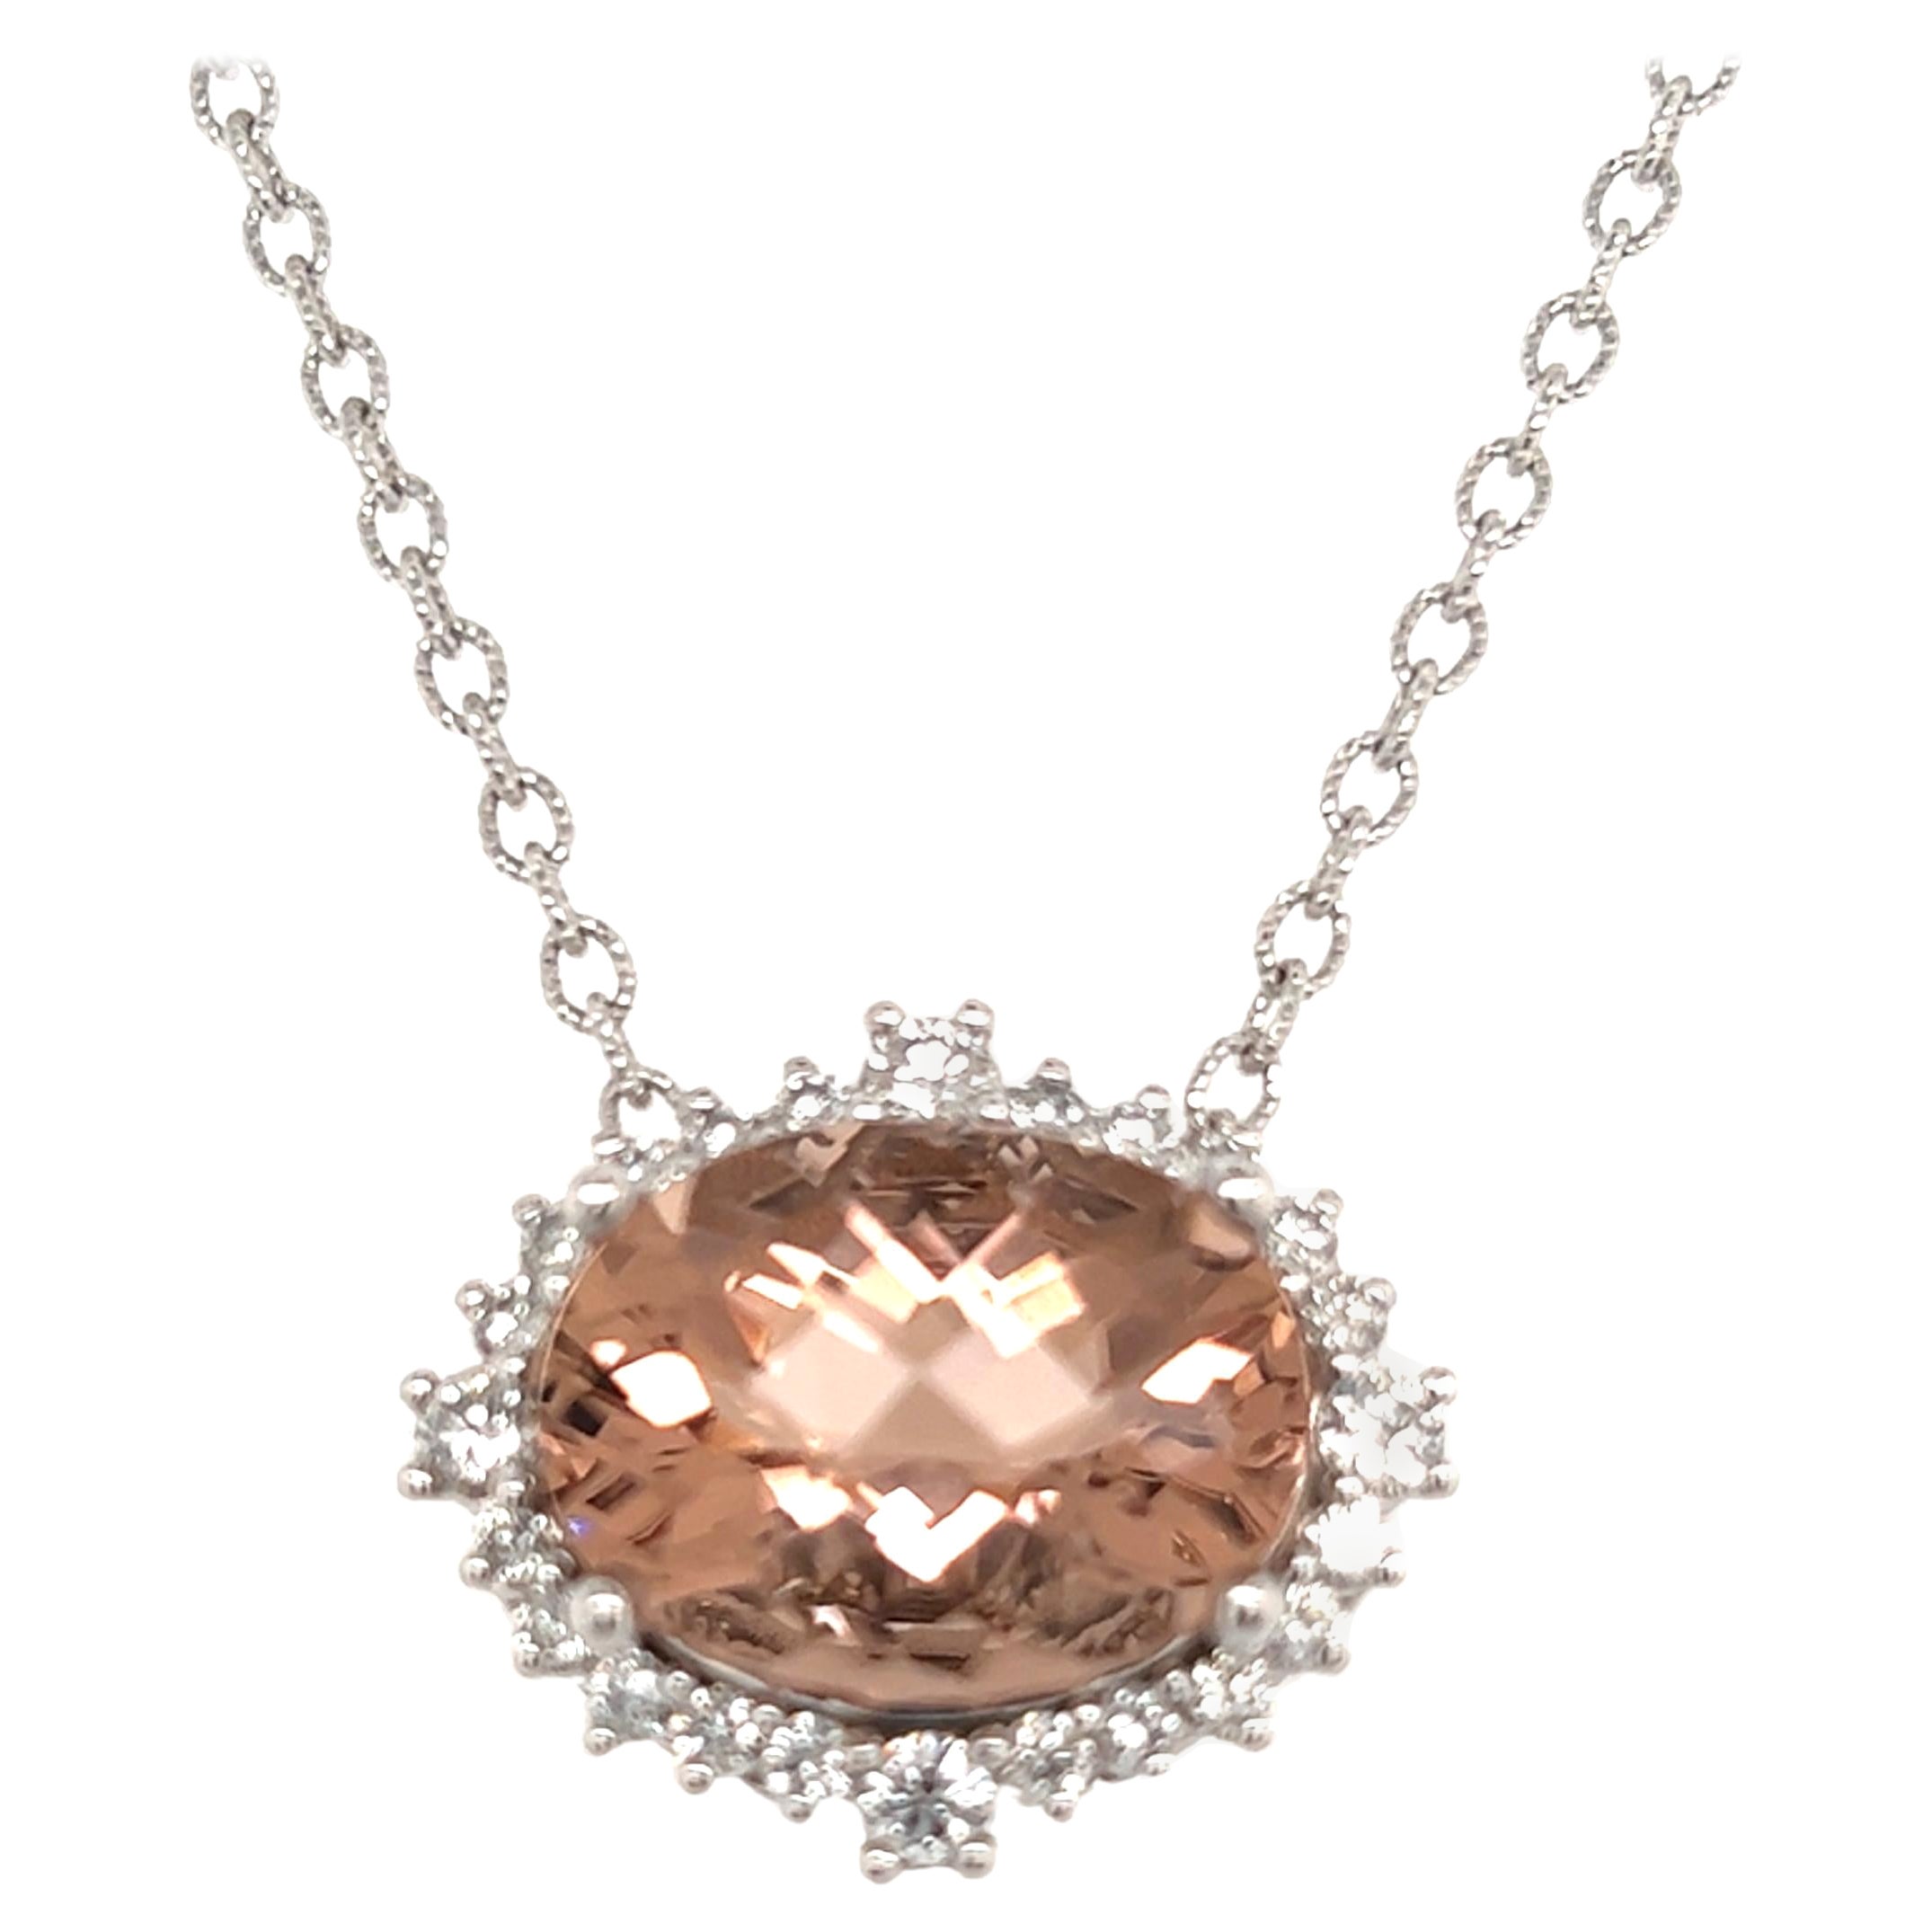 Natural Morganite Diamond Necklace 14k Gold 10.67 TCW Certified